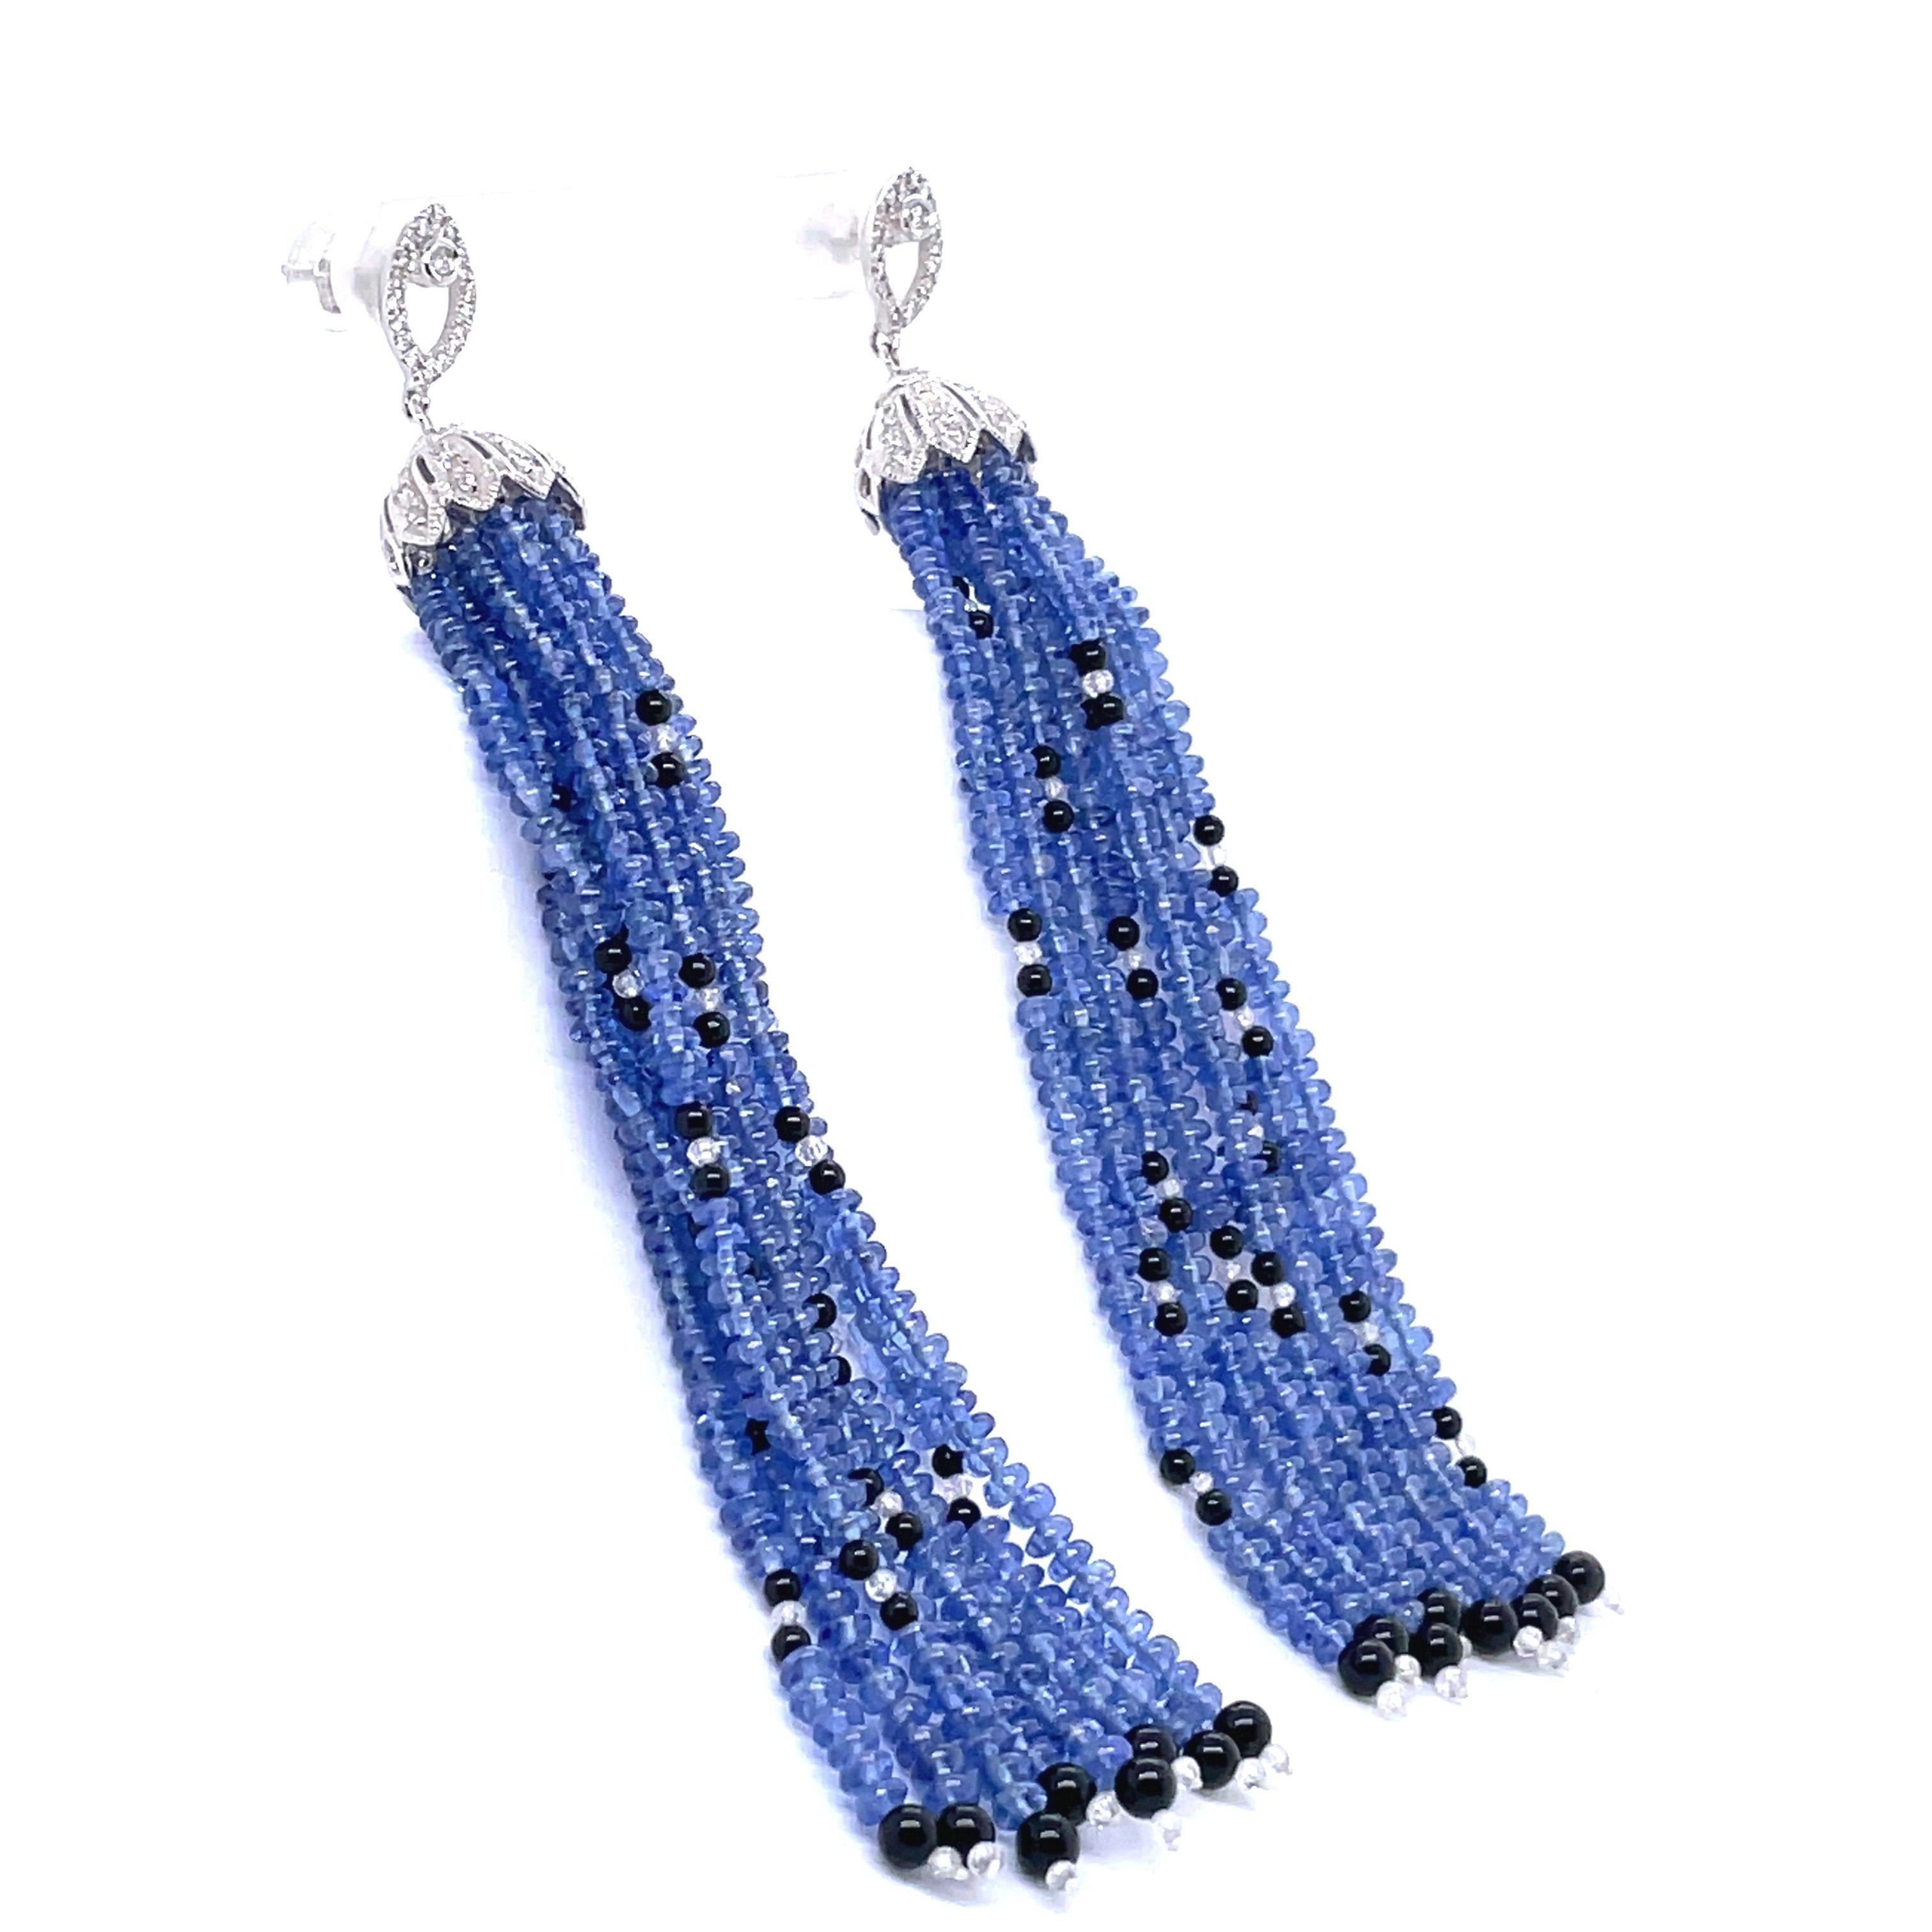 A striking statement piece for any occasion.

These carefully crafted earrings have 79.34 carats of brilliant sapphire beads sourced from Burma with no-heat treatment. 

Resembling grapes, each earring is adorned with 80 black onyx beads and 48